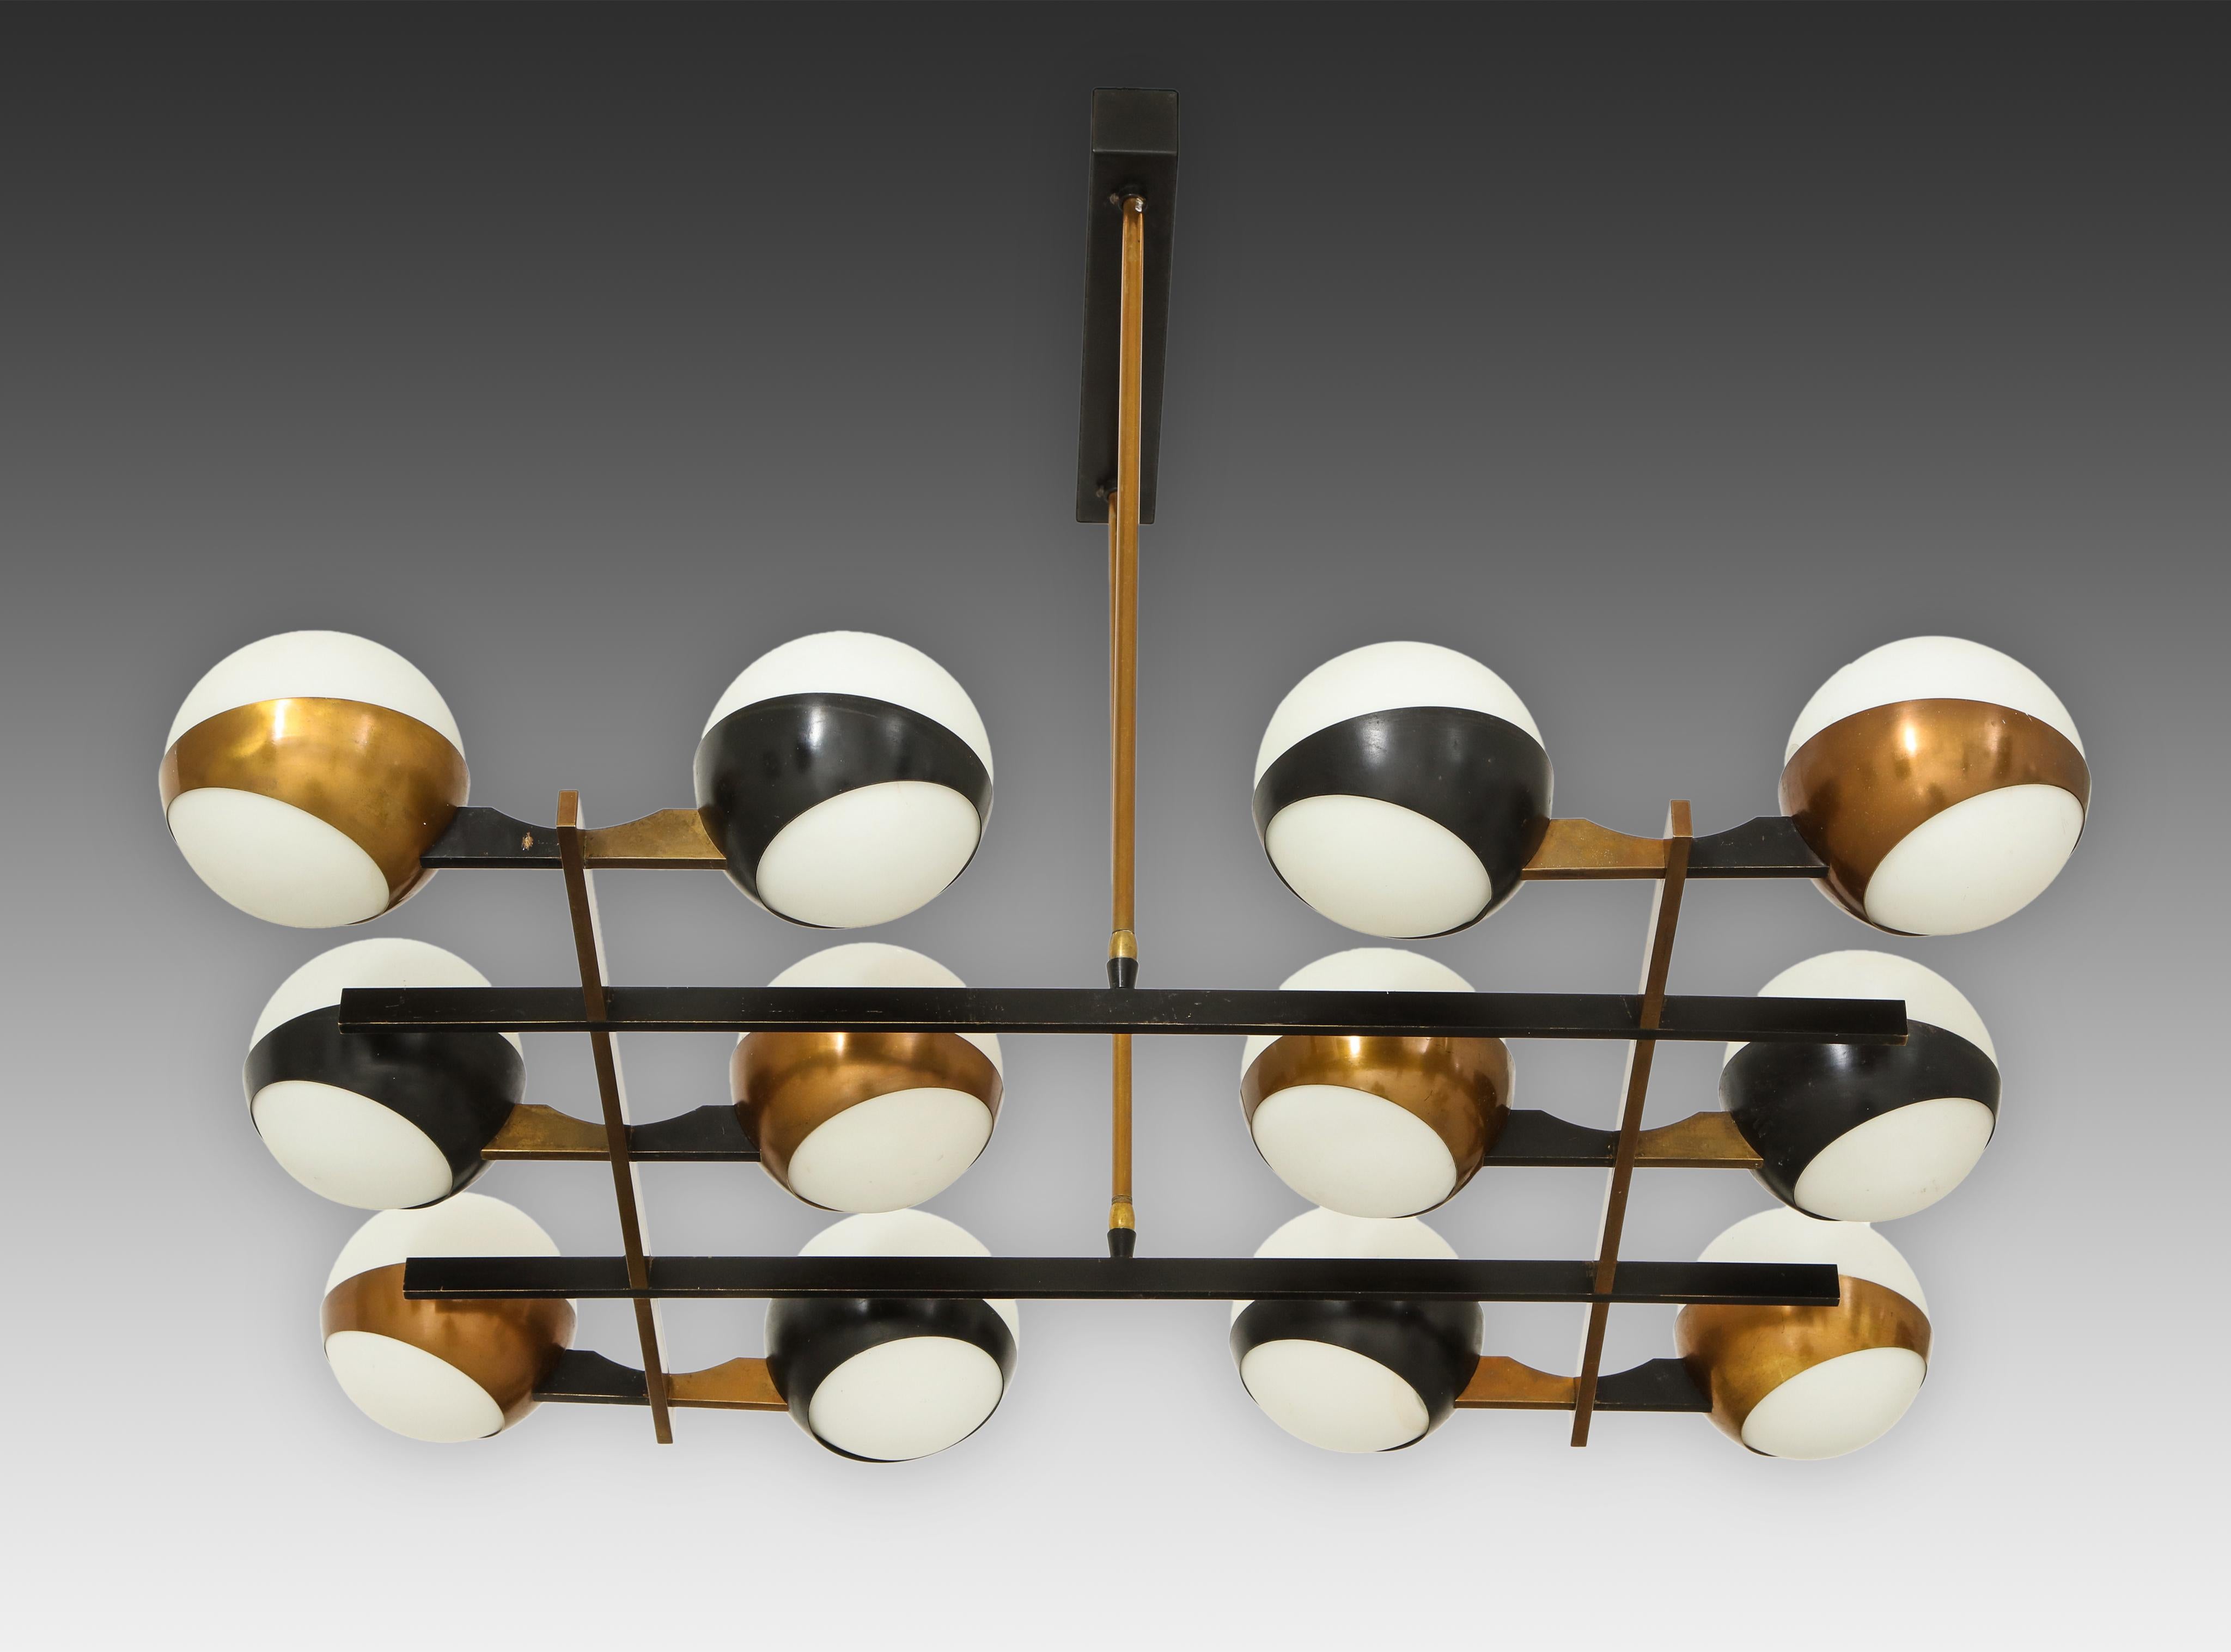 Stilnovo chandelier with twelve-opaque glass globes held in brass rings with alternating rings painted black on architectural grid-like structure. The structure is suspended by two brass rods on a black painted rectangular metal canopy. This